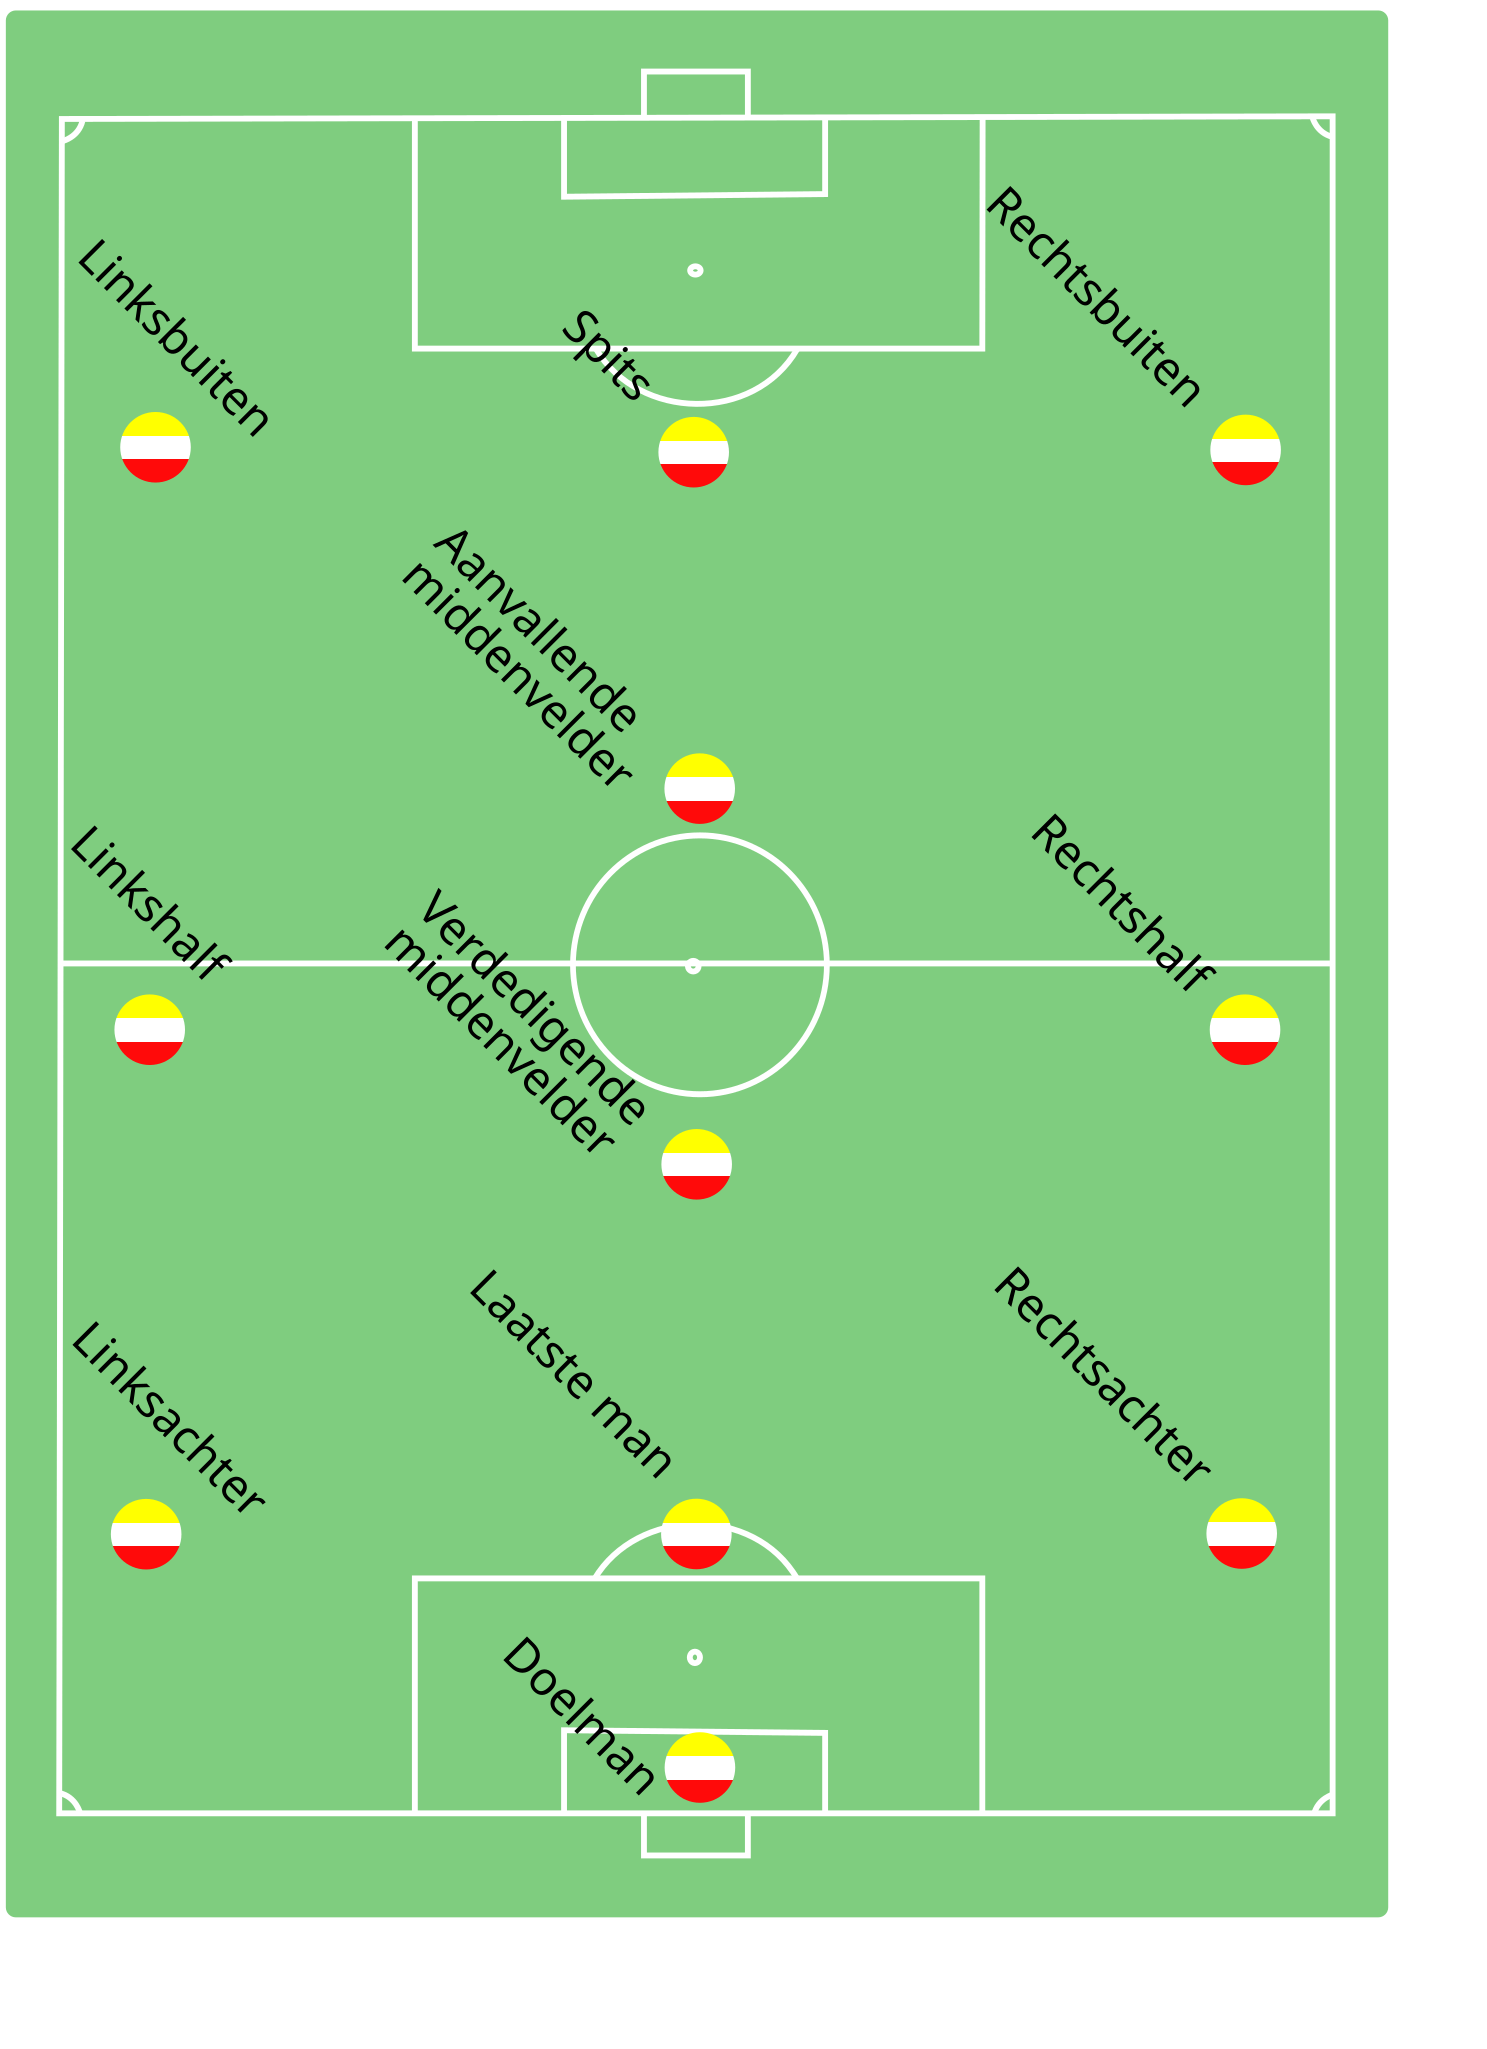 File:Voetbalopstelling ruit.svg - Wikimedia Commons